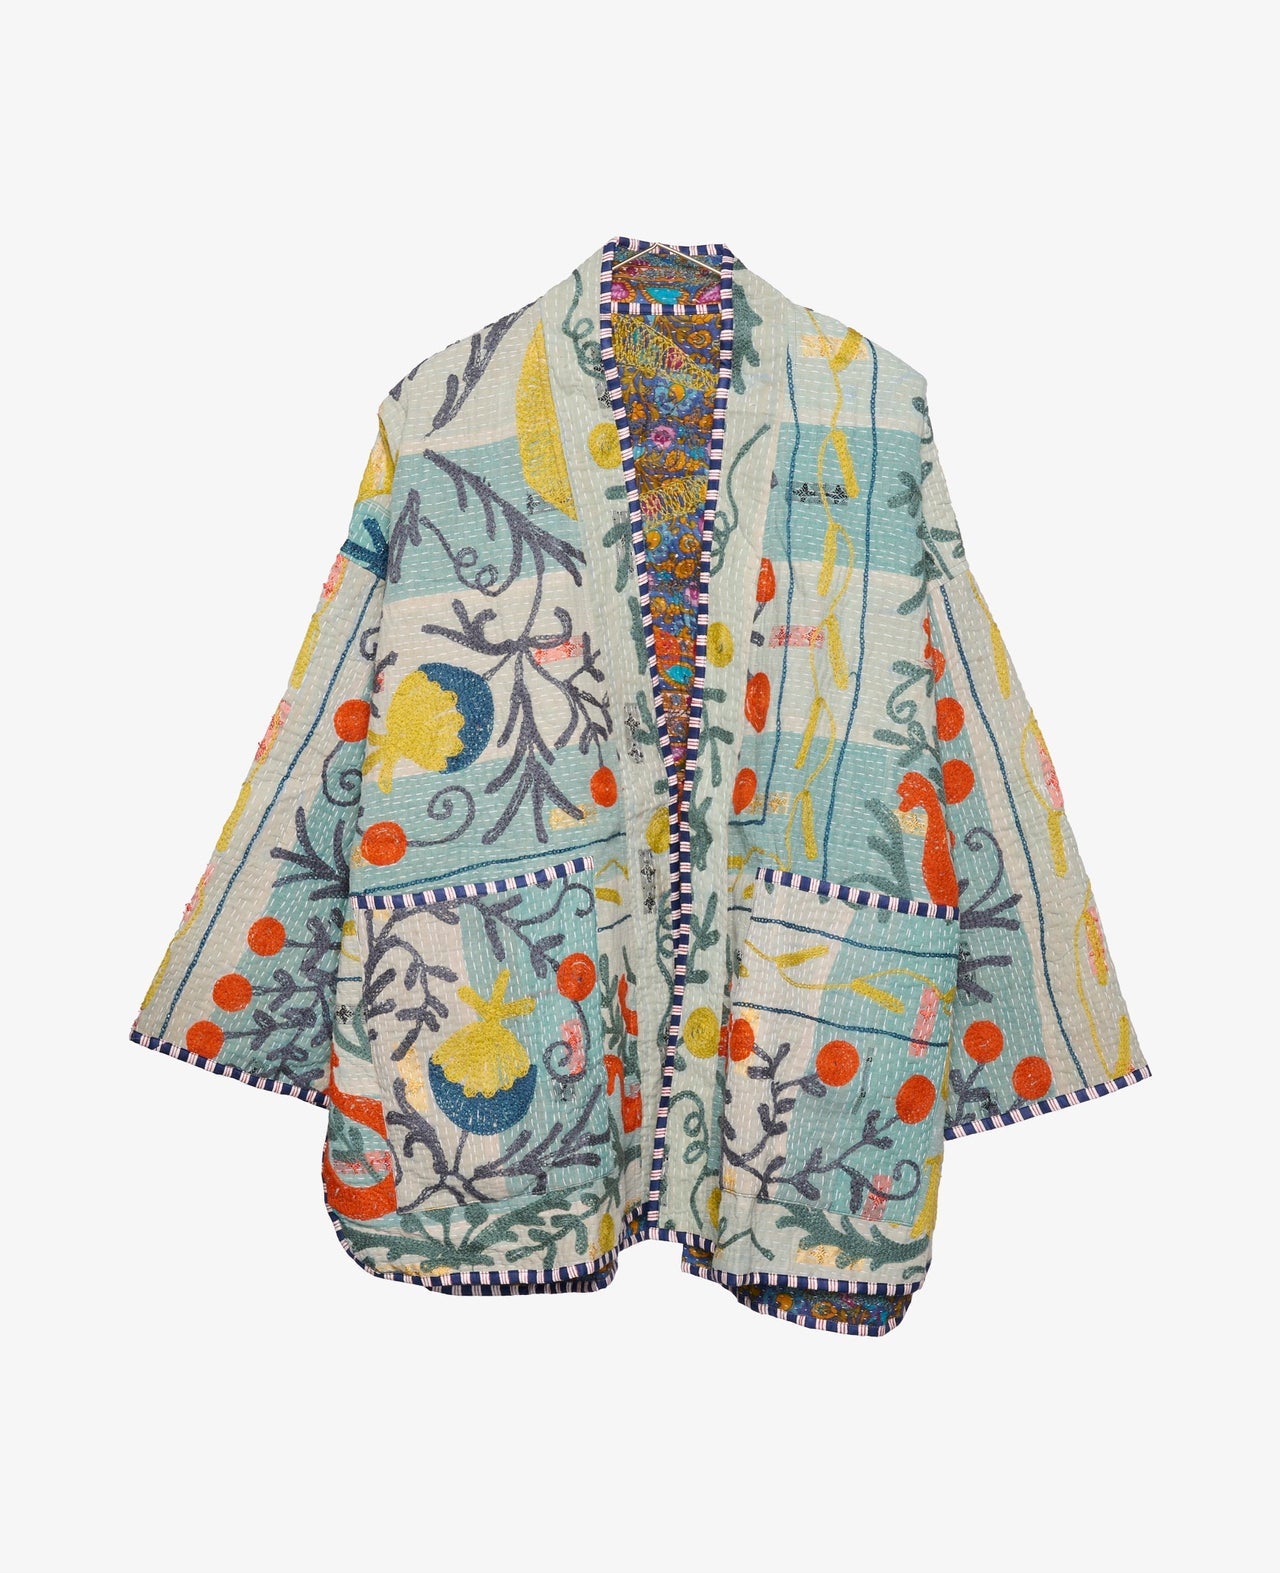 A white and blue Women's Jacket decorated with colorful suzani embroidery